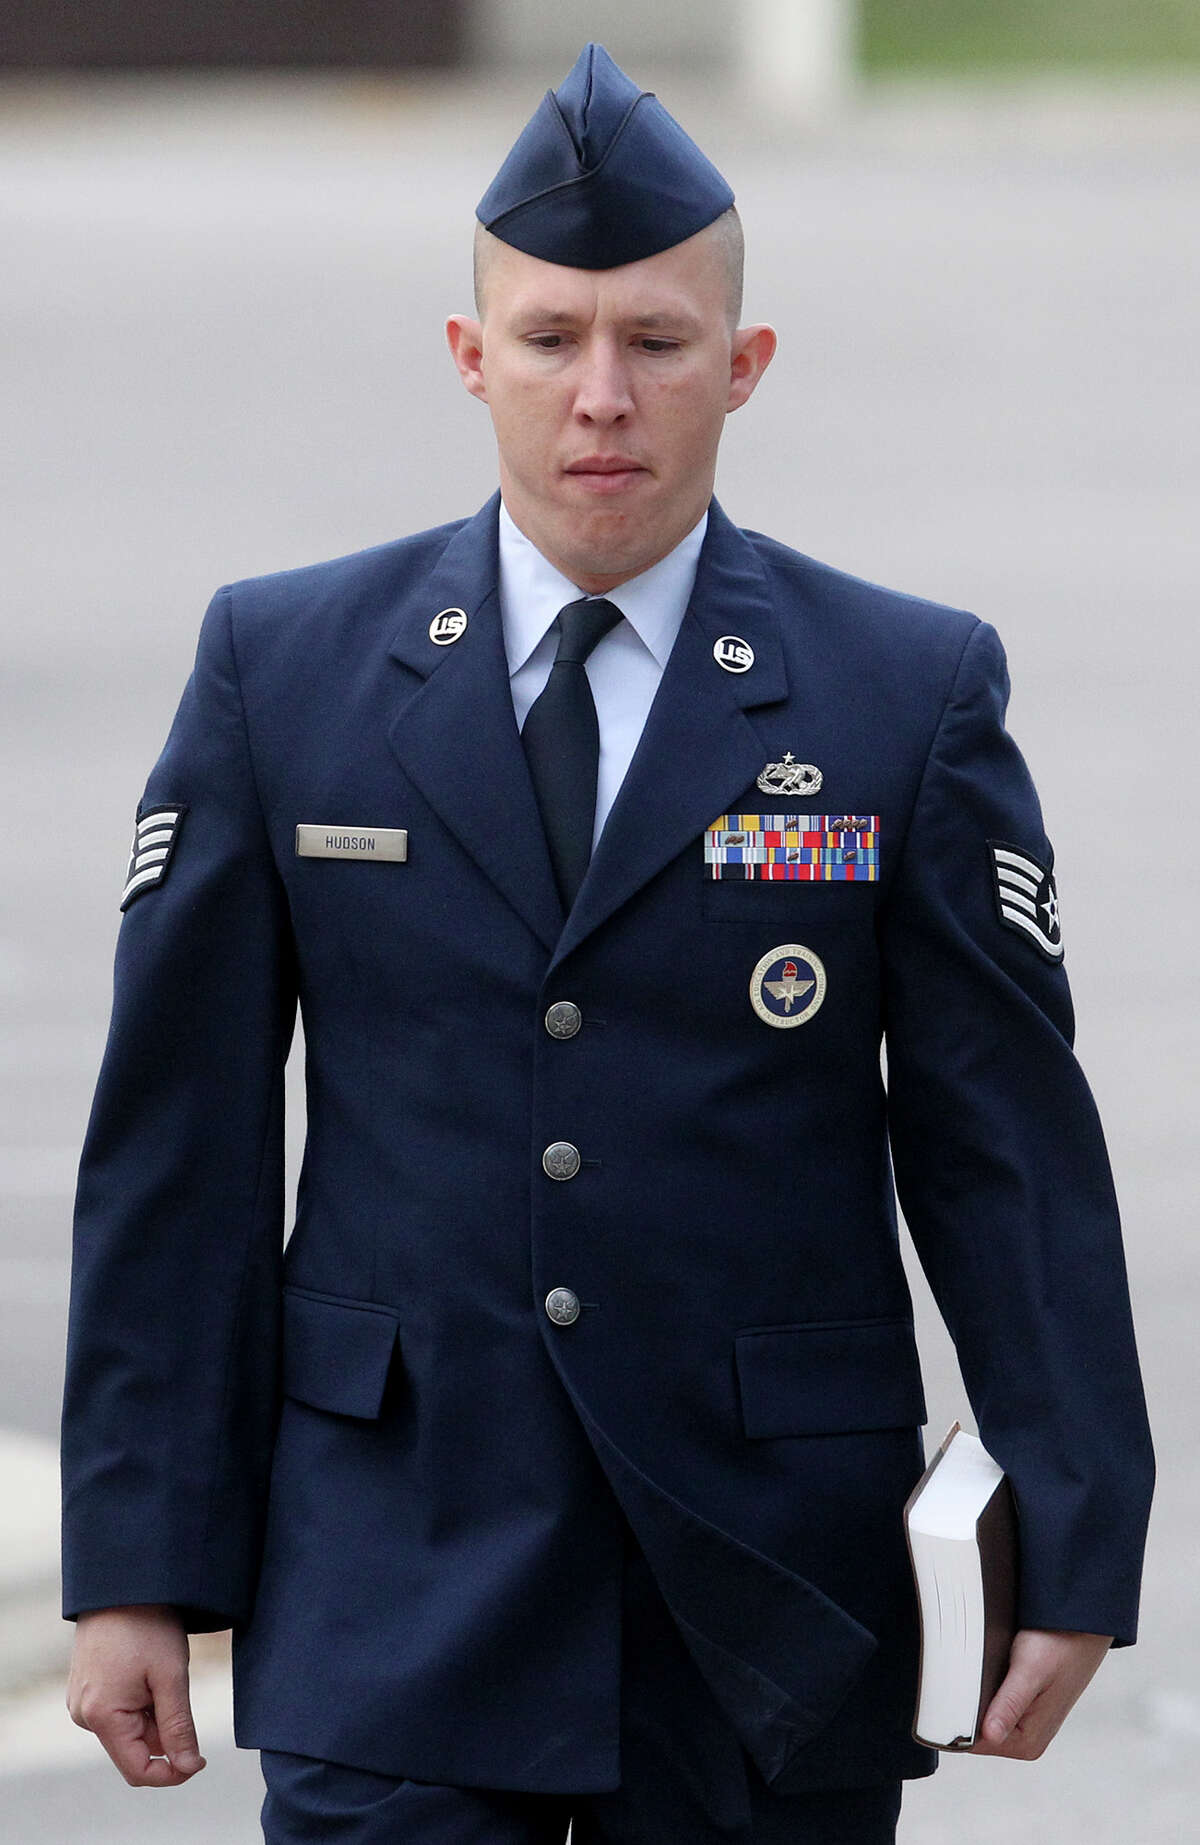 U.S. Air Force Staff Sergeant Robert Hudson walks at Joint Base San Antonio-Lackland Thursday April 25, 2013. The training instructor is accused of having sex with a technical school trainee and other charges.